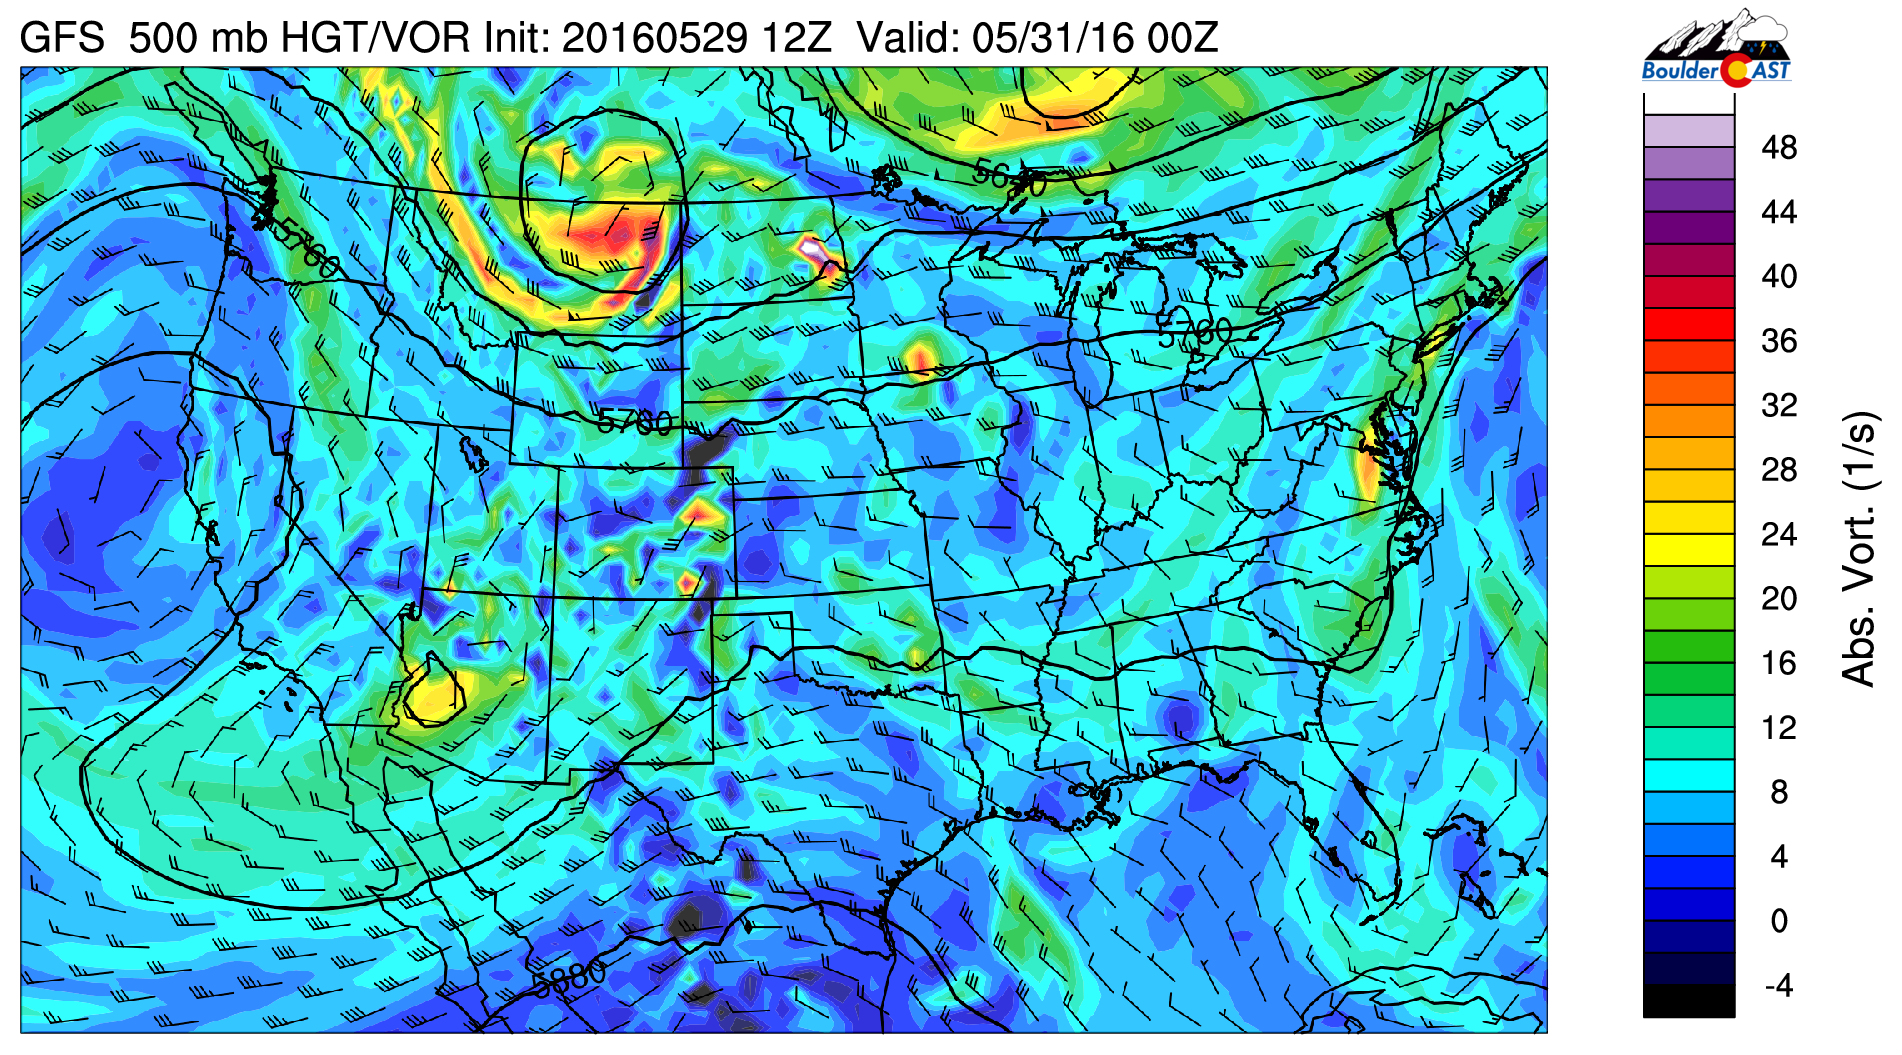 GFS 500 mb vorticity for Monday 